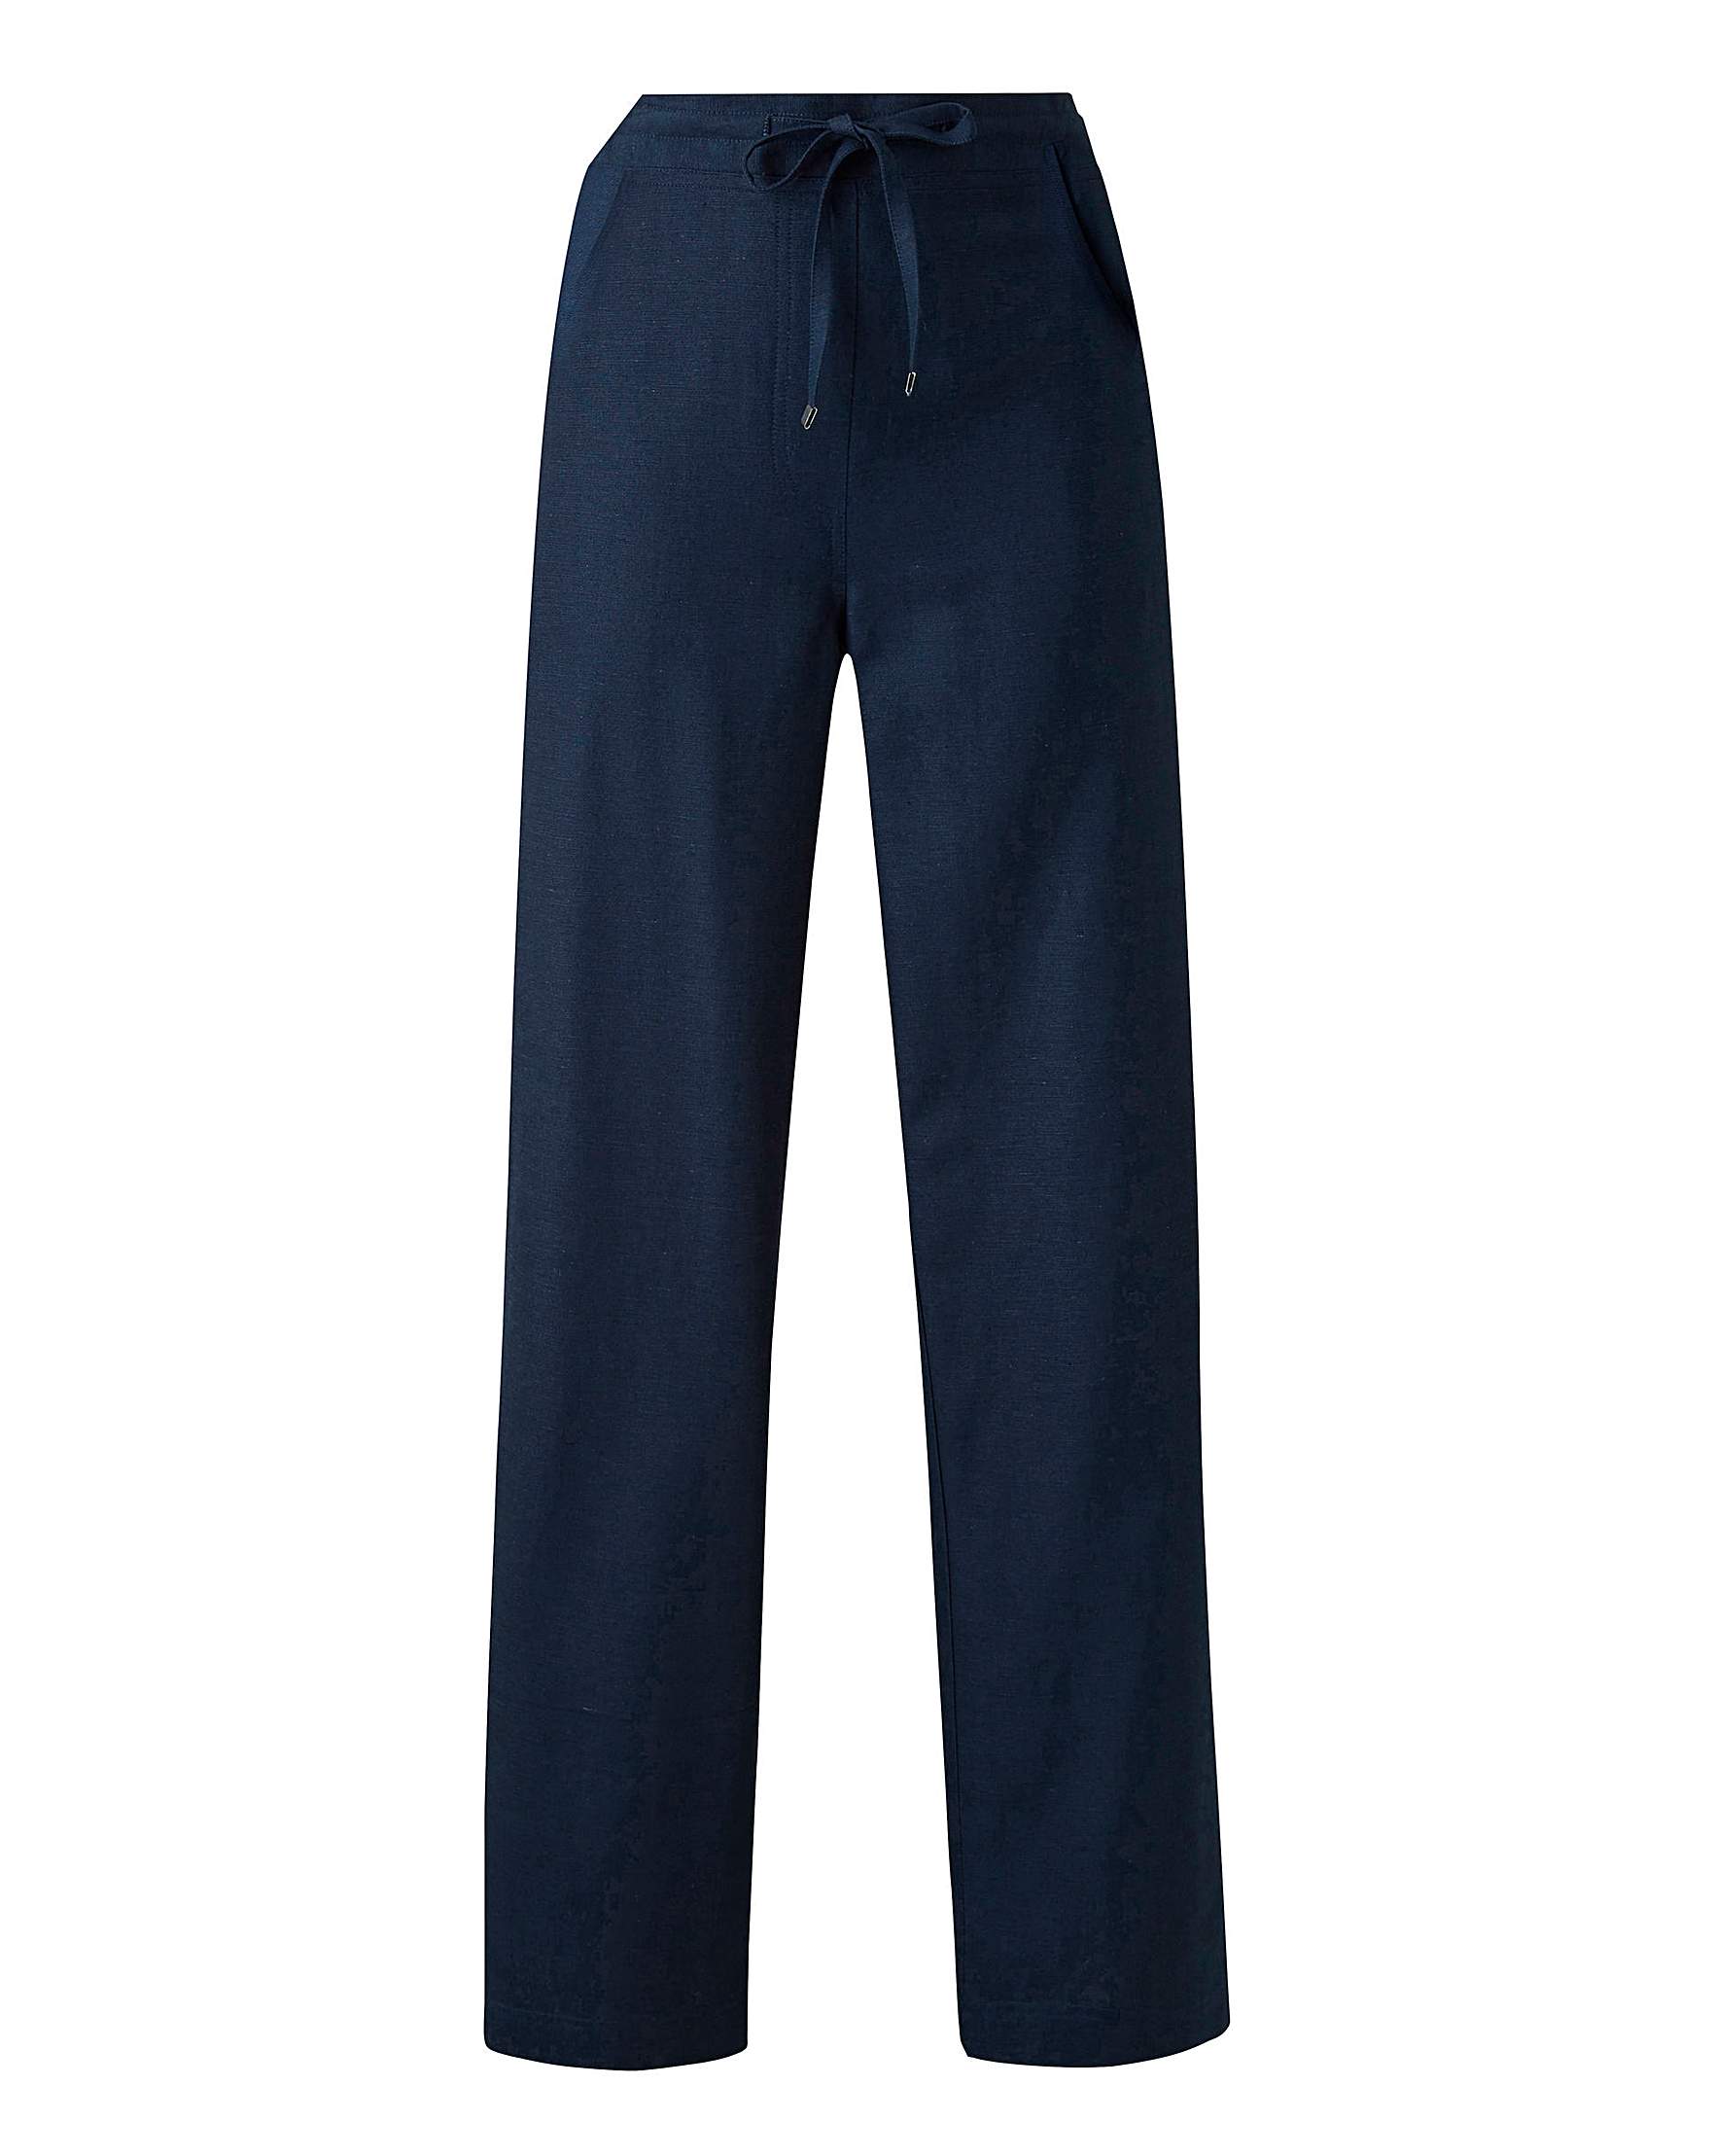 Capsule - - NAVY Linen Blend Easy Care Trousers - Size 10 to 32